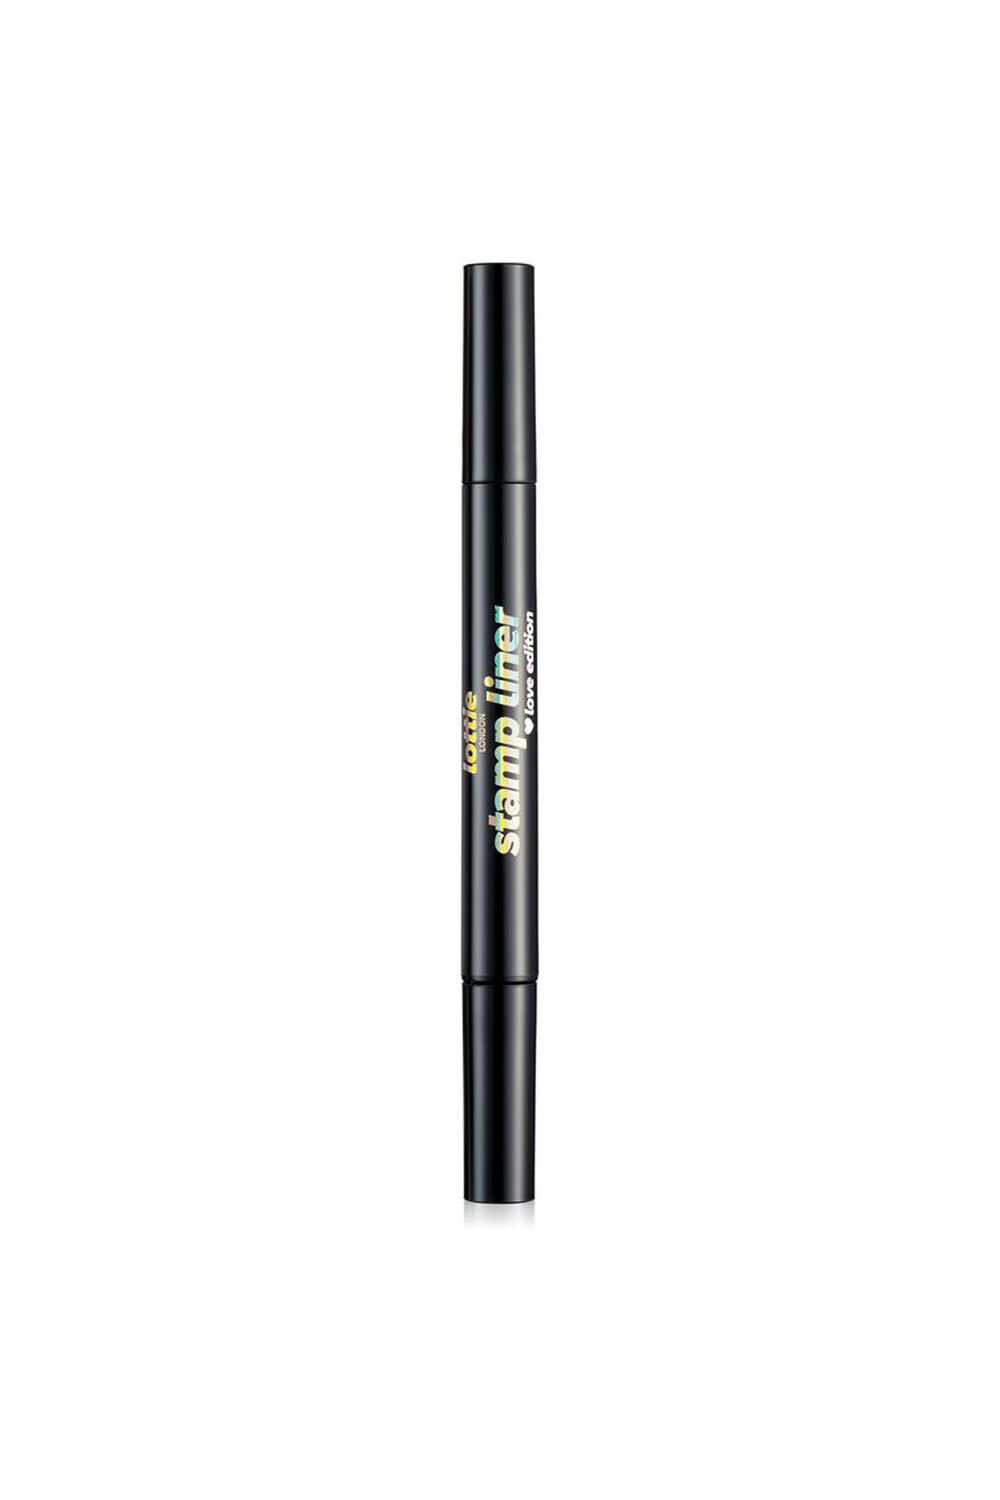 Lottie London Stamp Liquid Liner- Love Edition - Butterfly, image 3